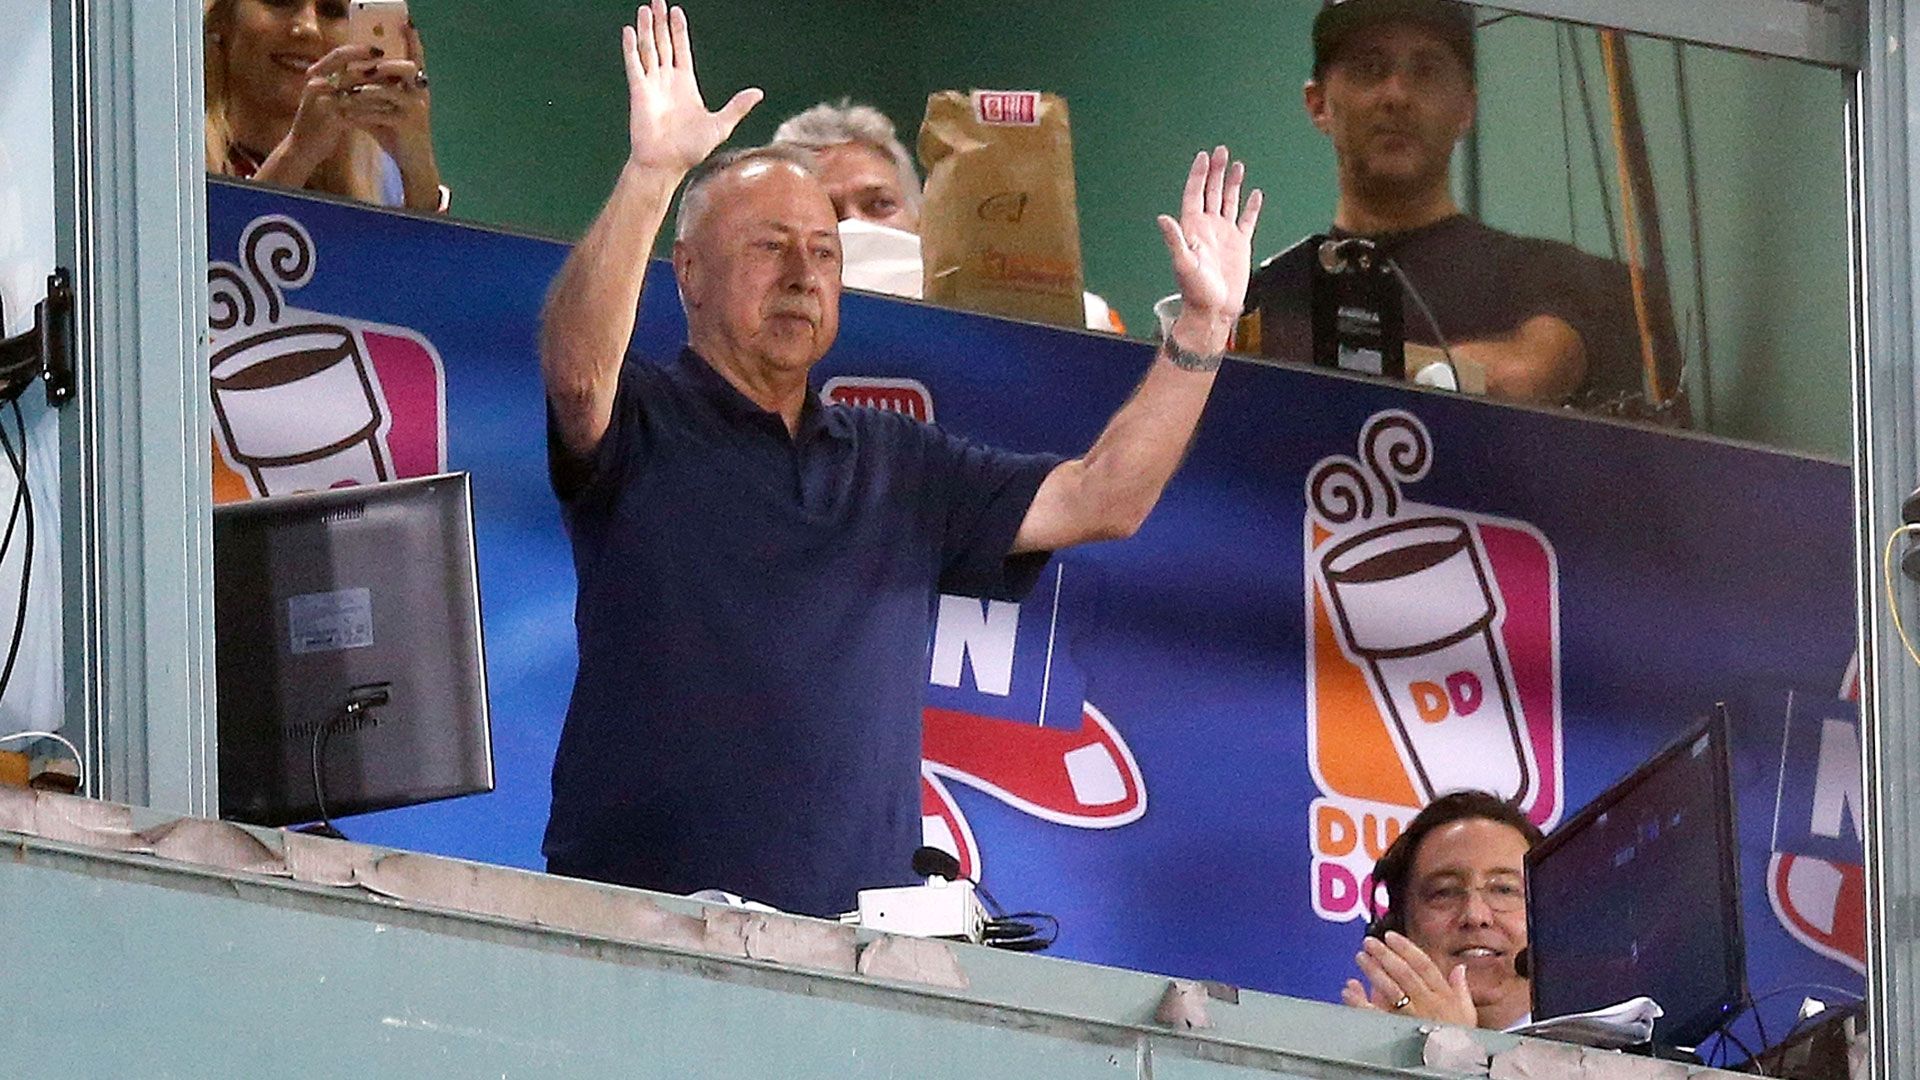 Jerry Remy, Boston Red Sox player and broadcaster, dies at 68